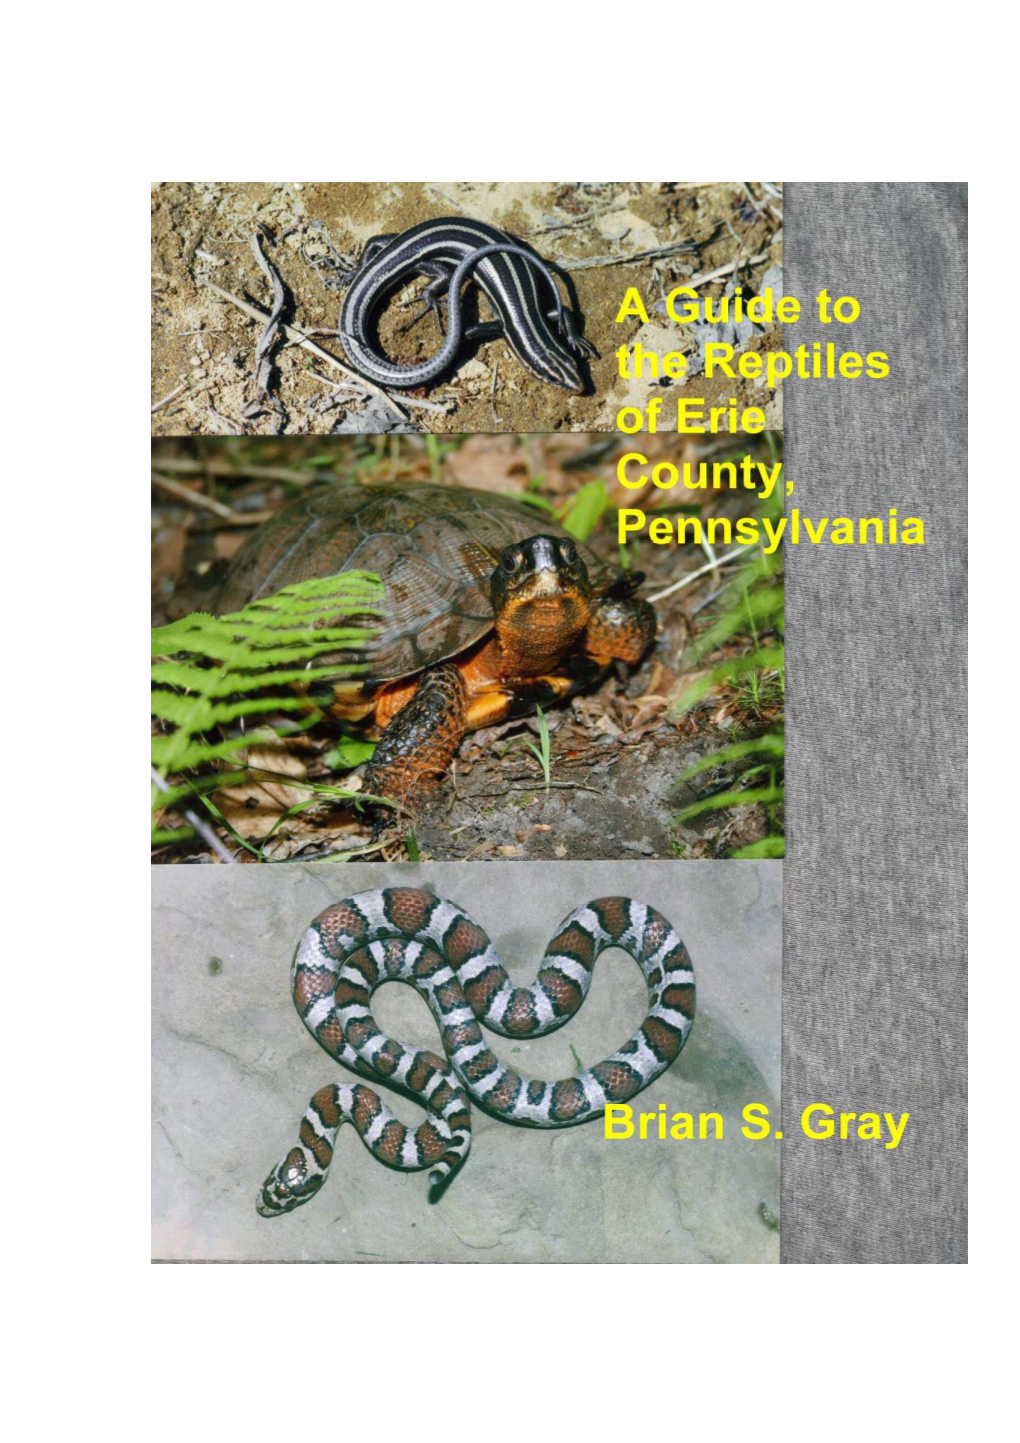 A Guide to the Reptiles of Erie County, Pennsylvania